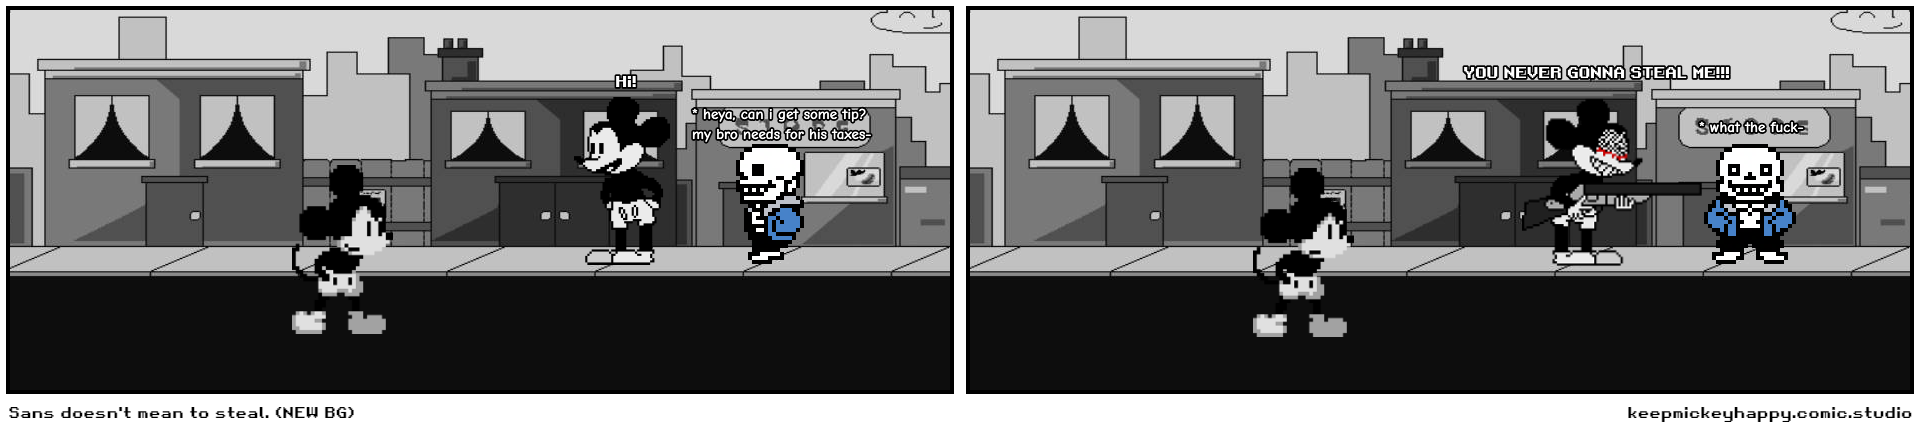 Sans doesn't mean to steal. (NEW BG)